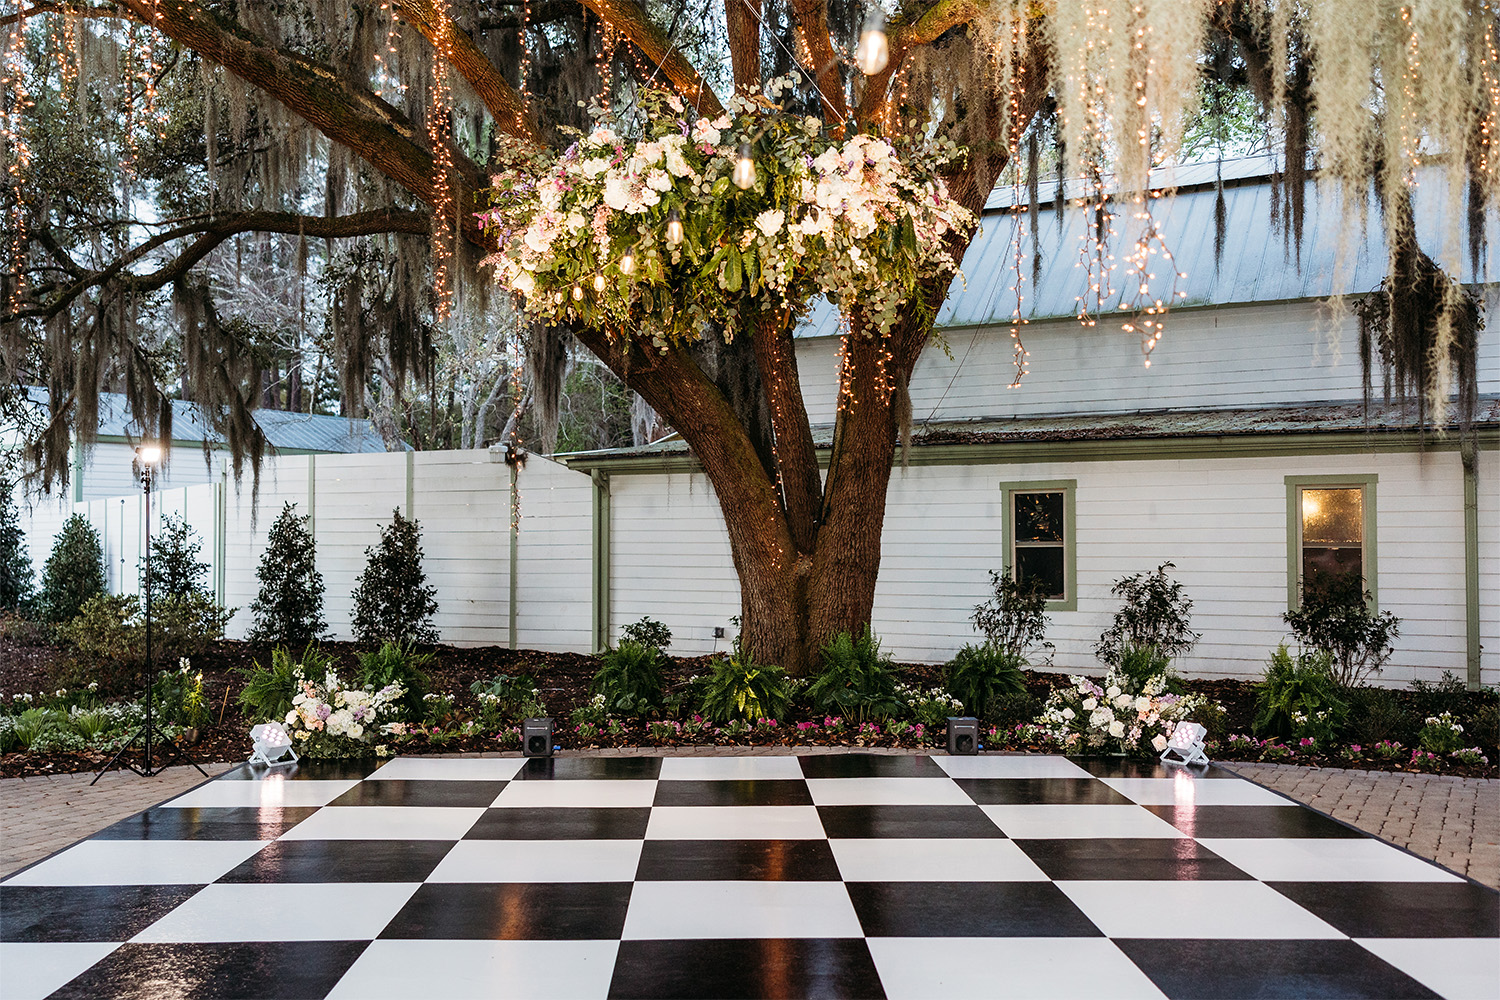 Outdoor dance floor decorated with a floral chandelier